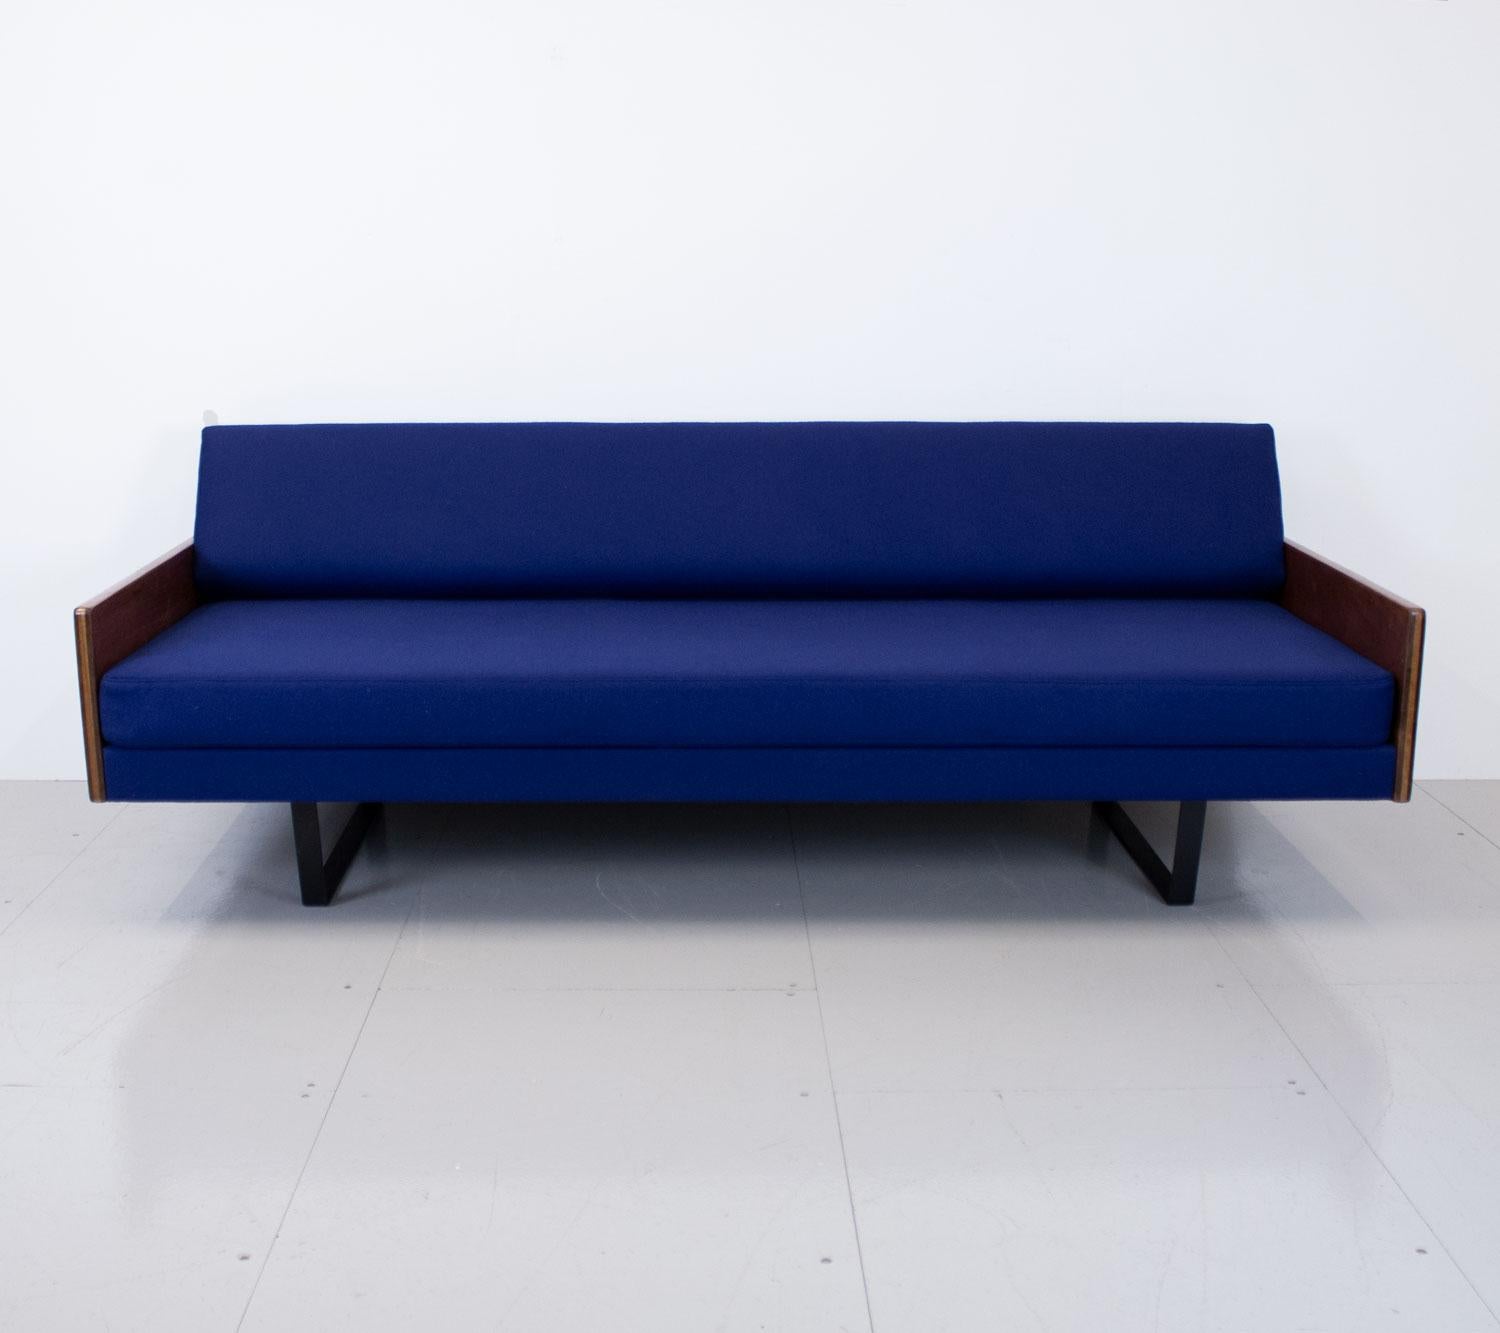 Mid-Century Modern Blue Sofa Bed by Robin Day for Hille, 1950s